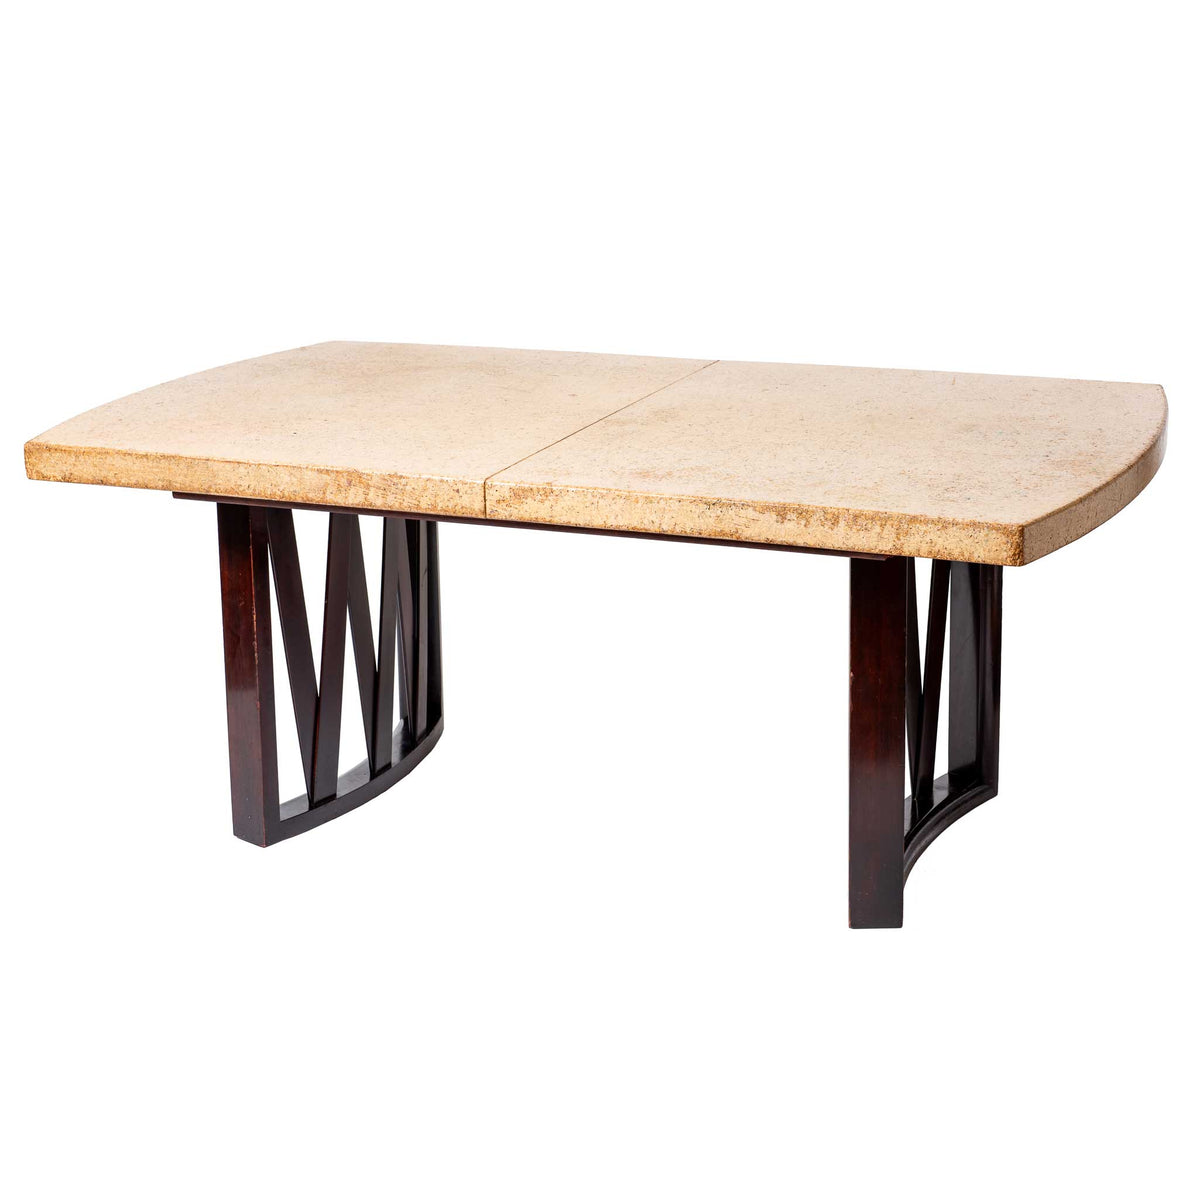 Cork Top Dining Table S2 F9